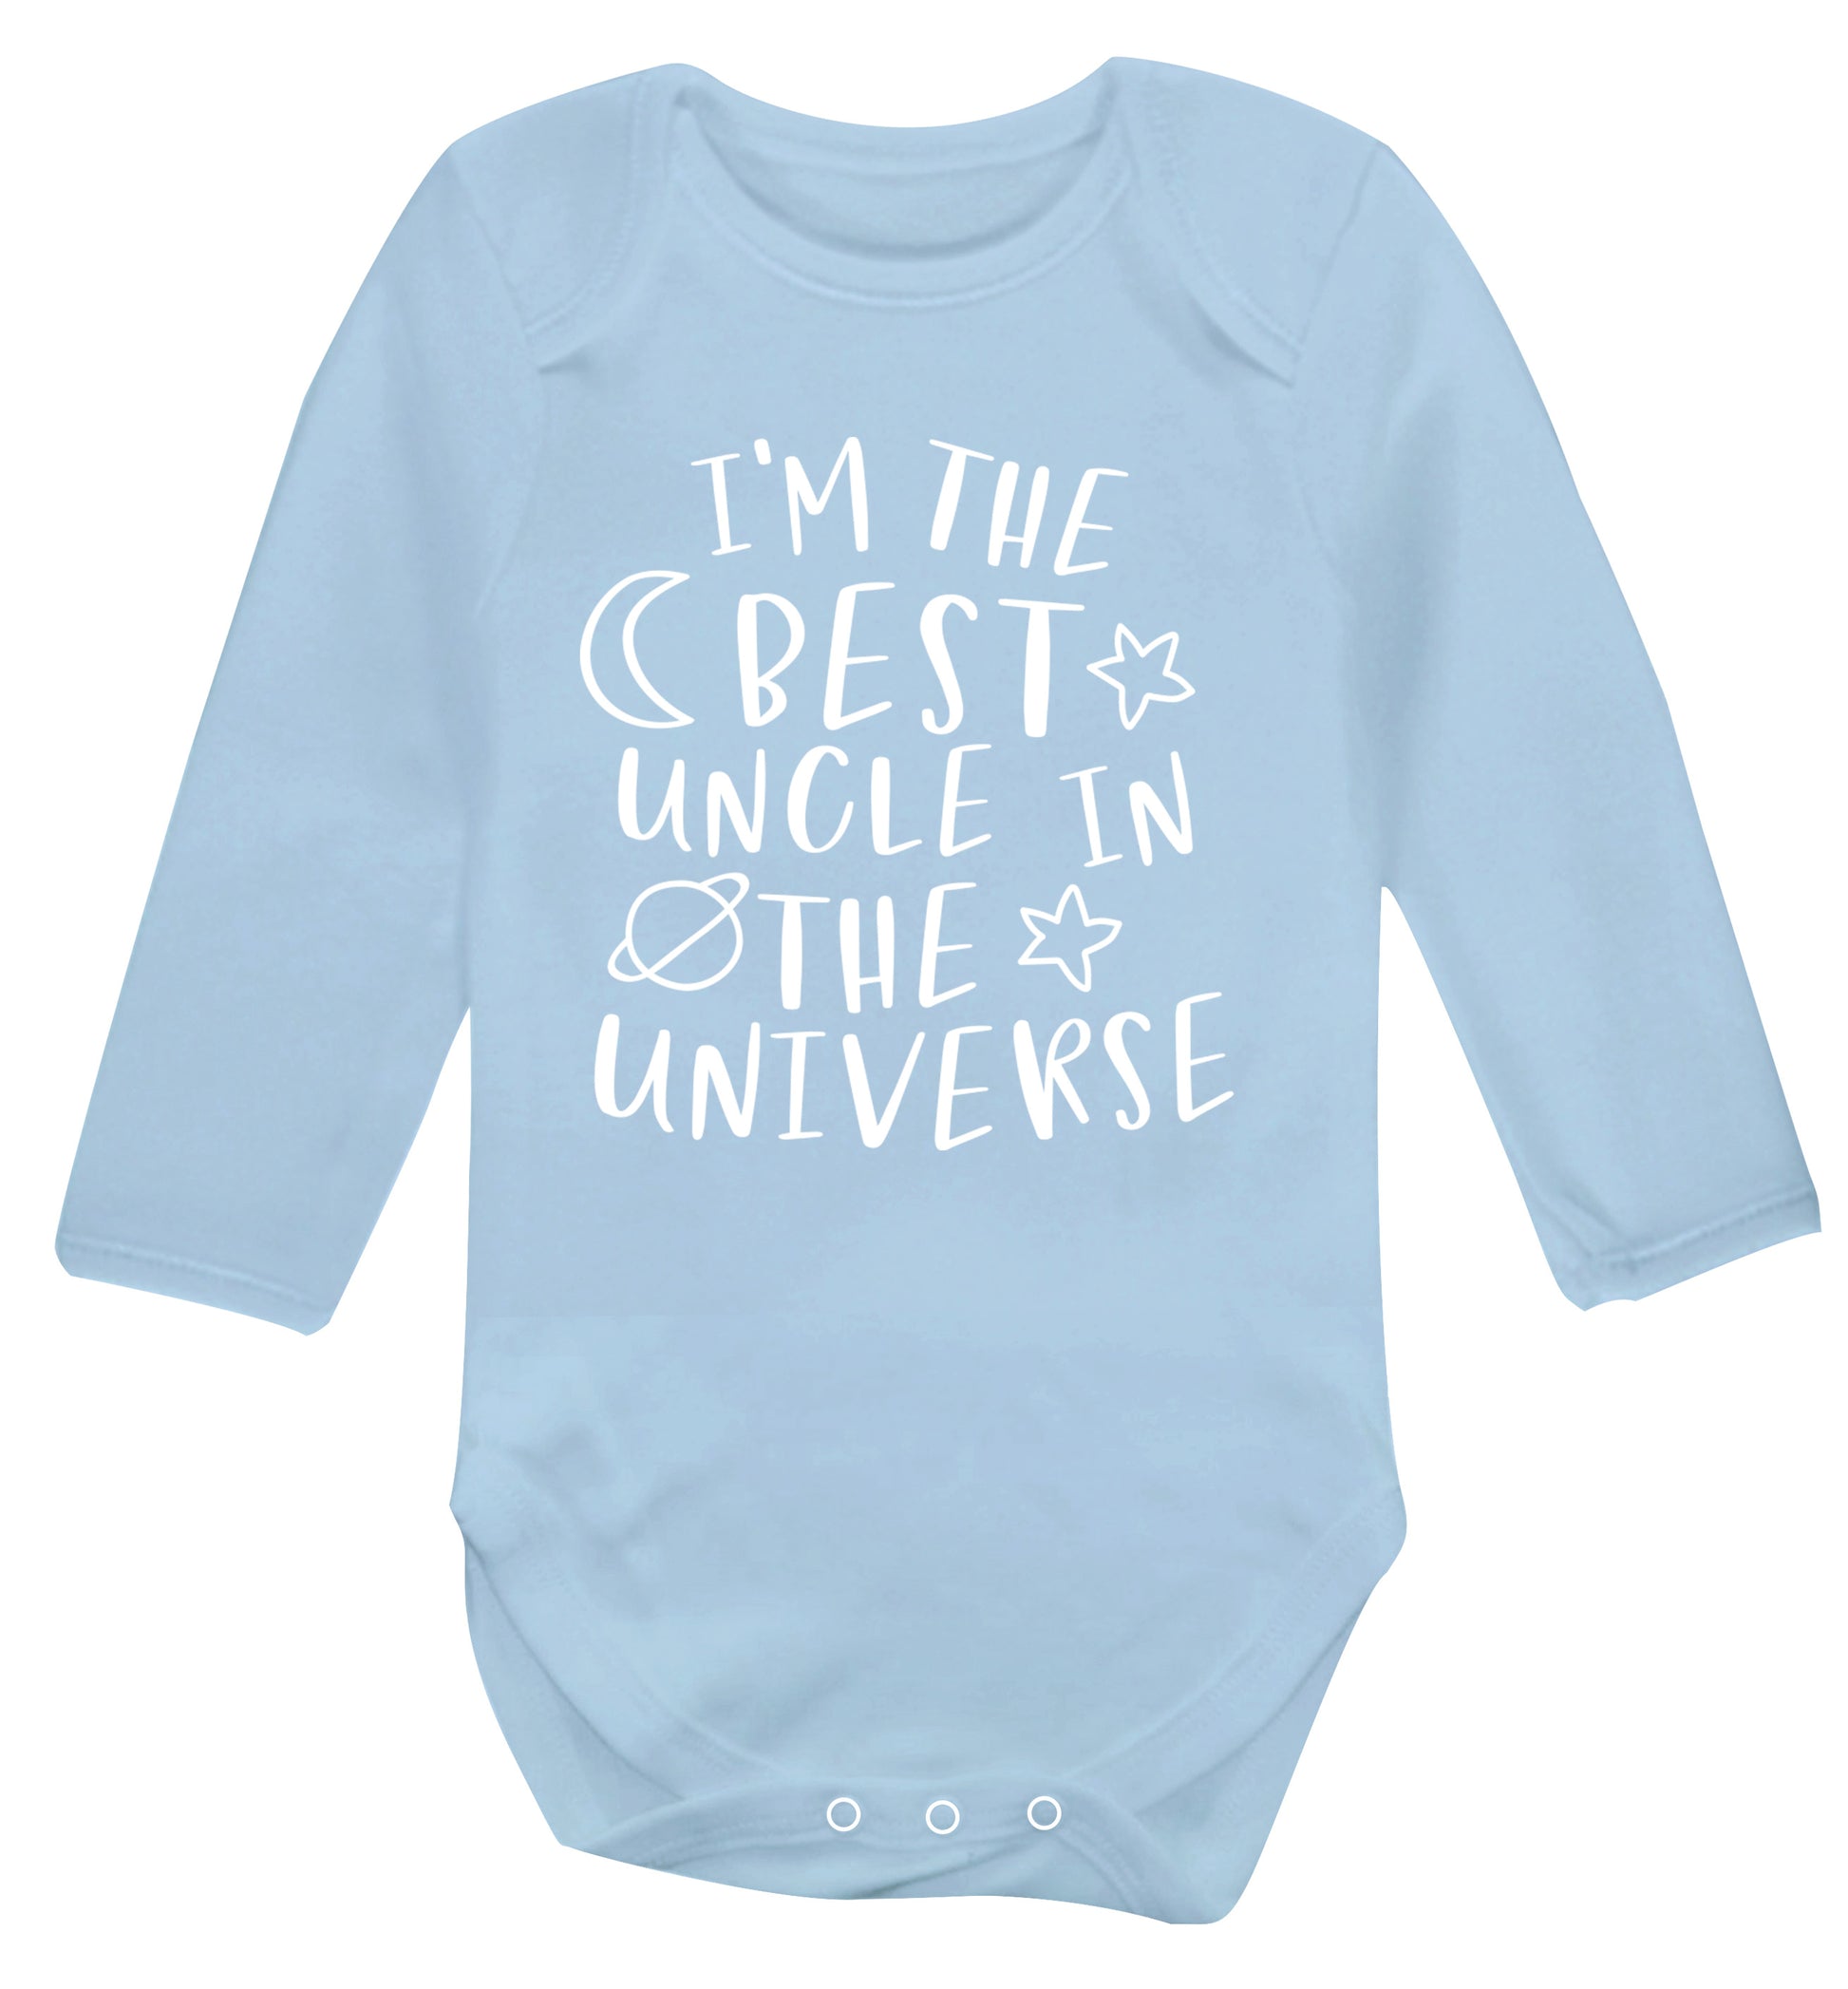 I'm the best uncle in the universe Baby Vest long sleeved pale blue 6-12 months